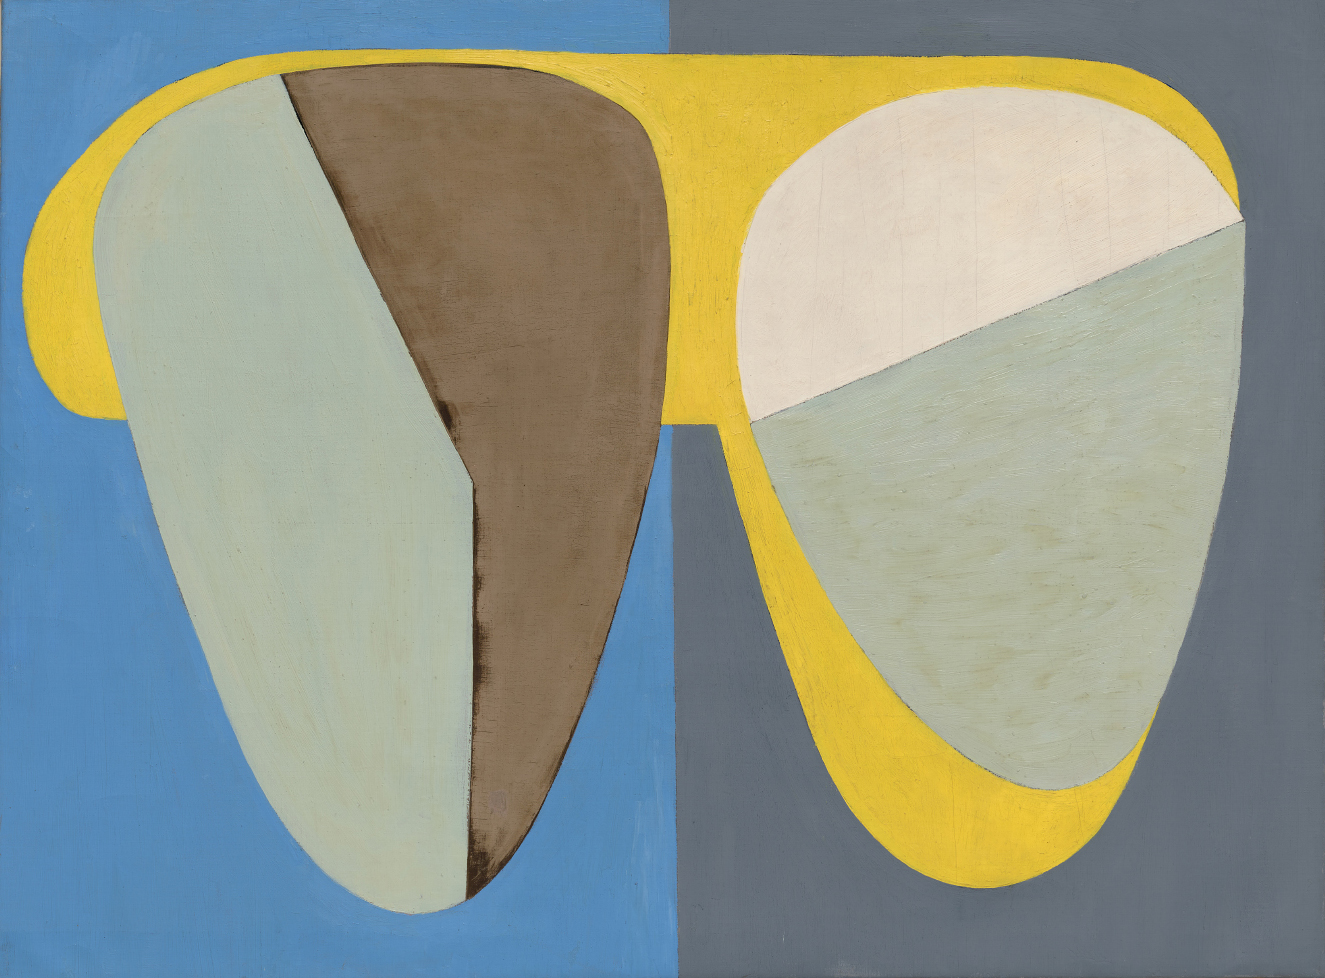  Wolfgang Paalen,  Deux Tetes II,  1935, Oil and tempera on canvas, 37 3/4 x 50 1/2 inches (95.9 x 128.3 cm) 